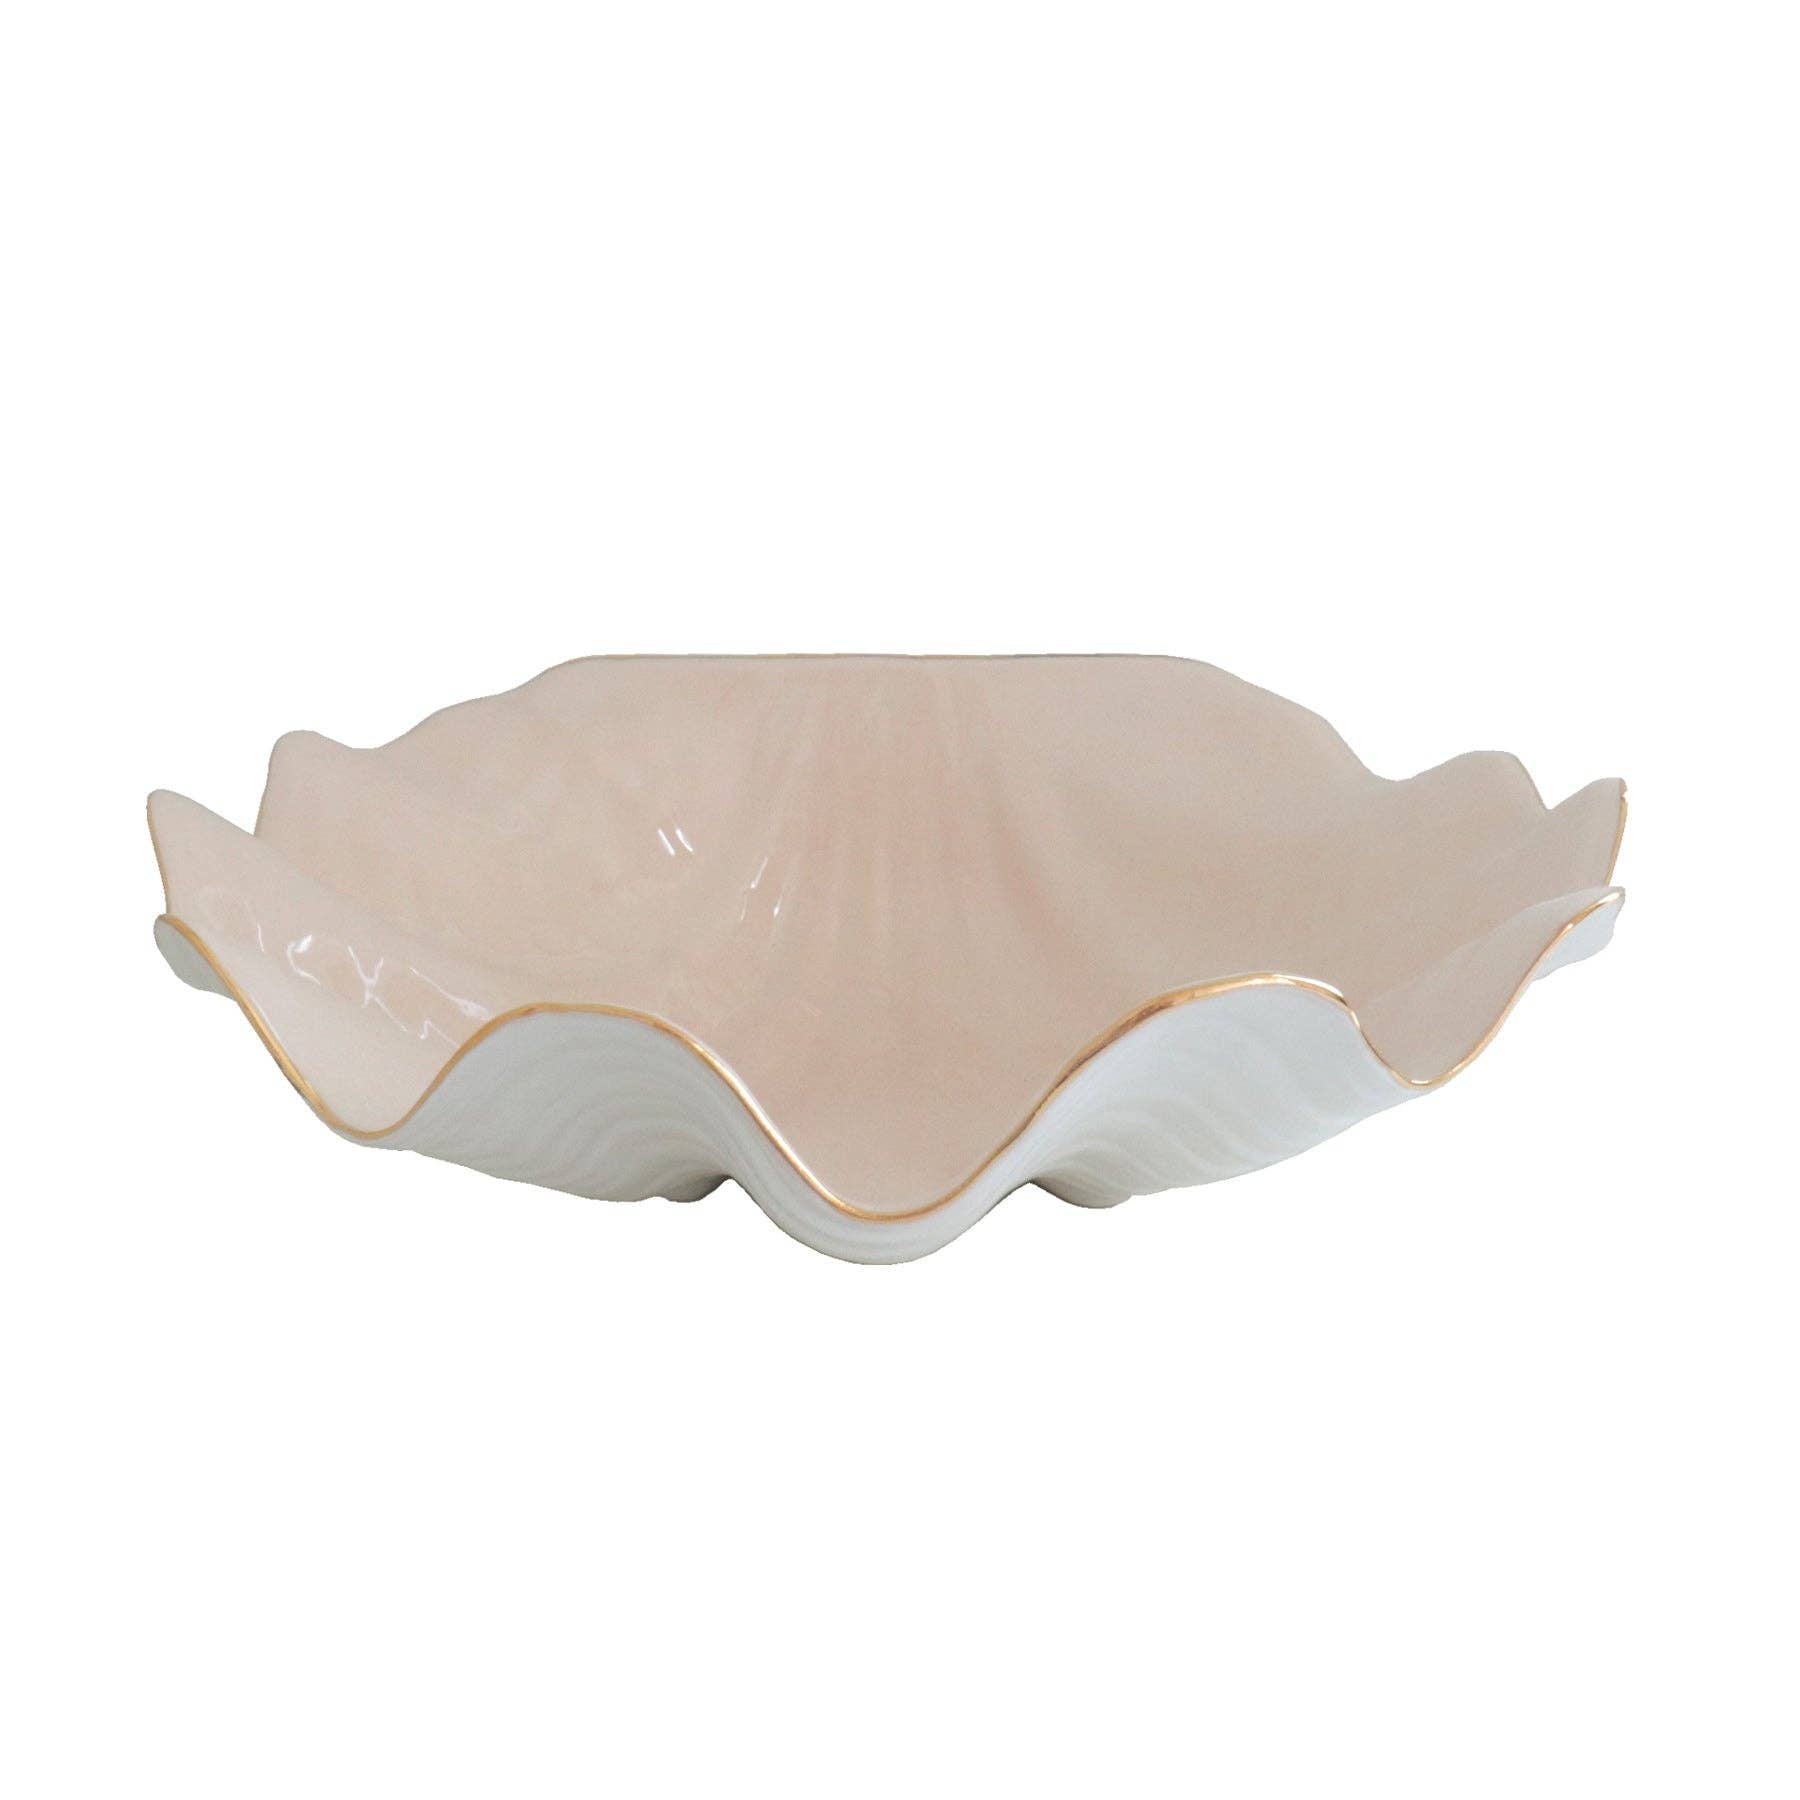 Lo Home by Lauren Haskell Designs Clam Shell Bowl with 22K Gold Accent: Large / Pink - Littlel Birdies